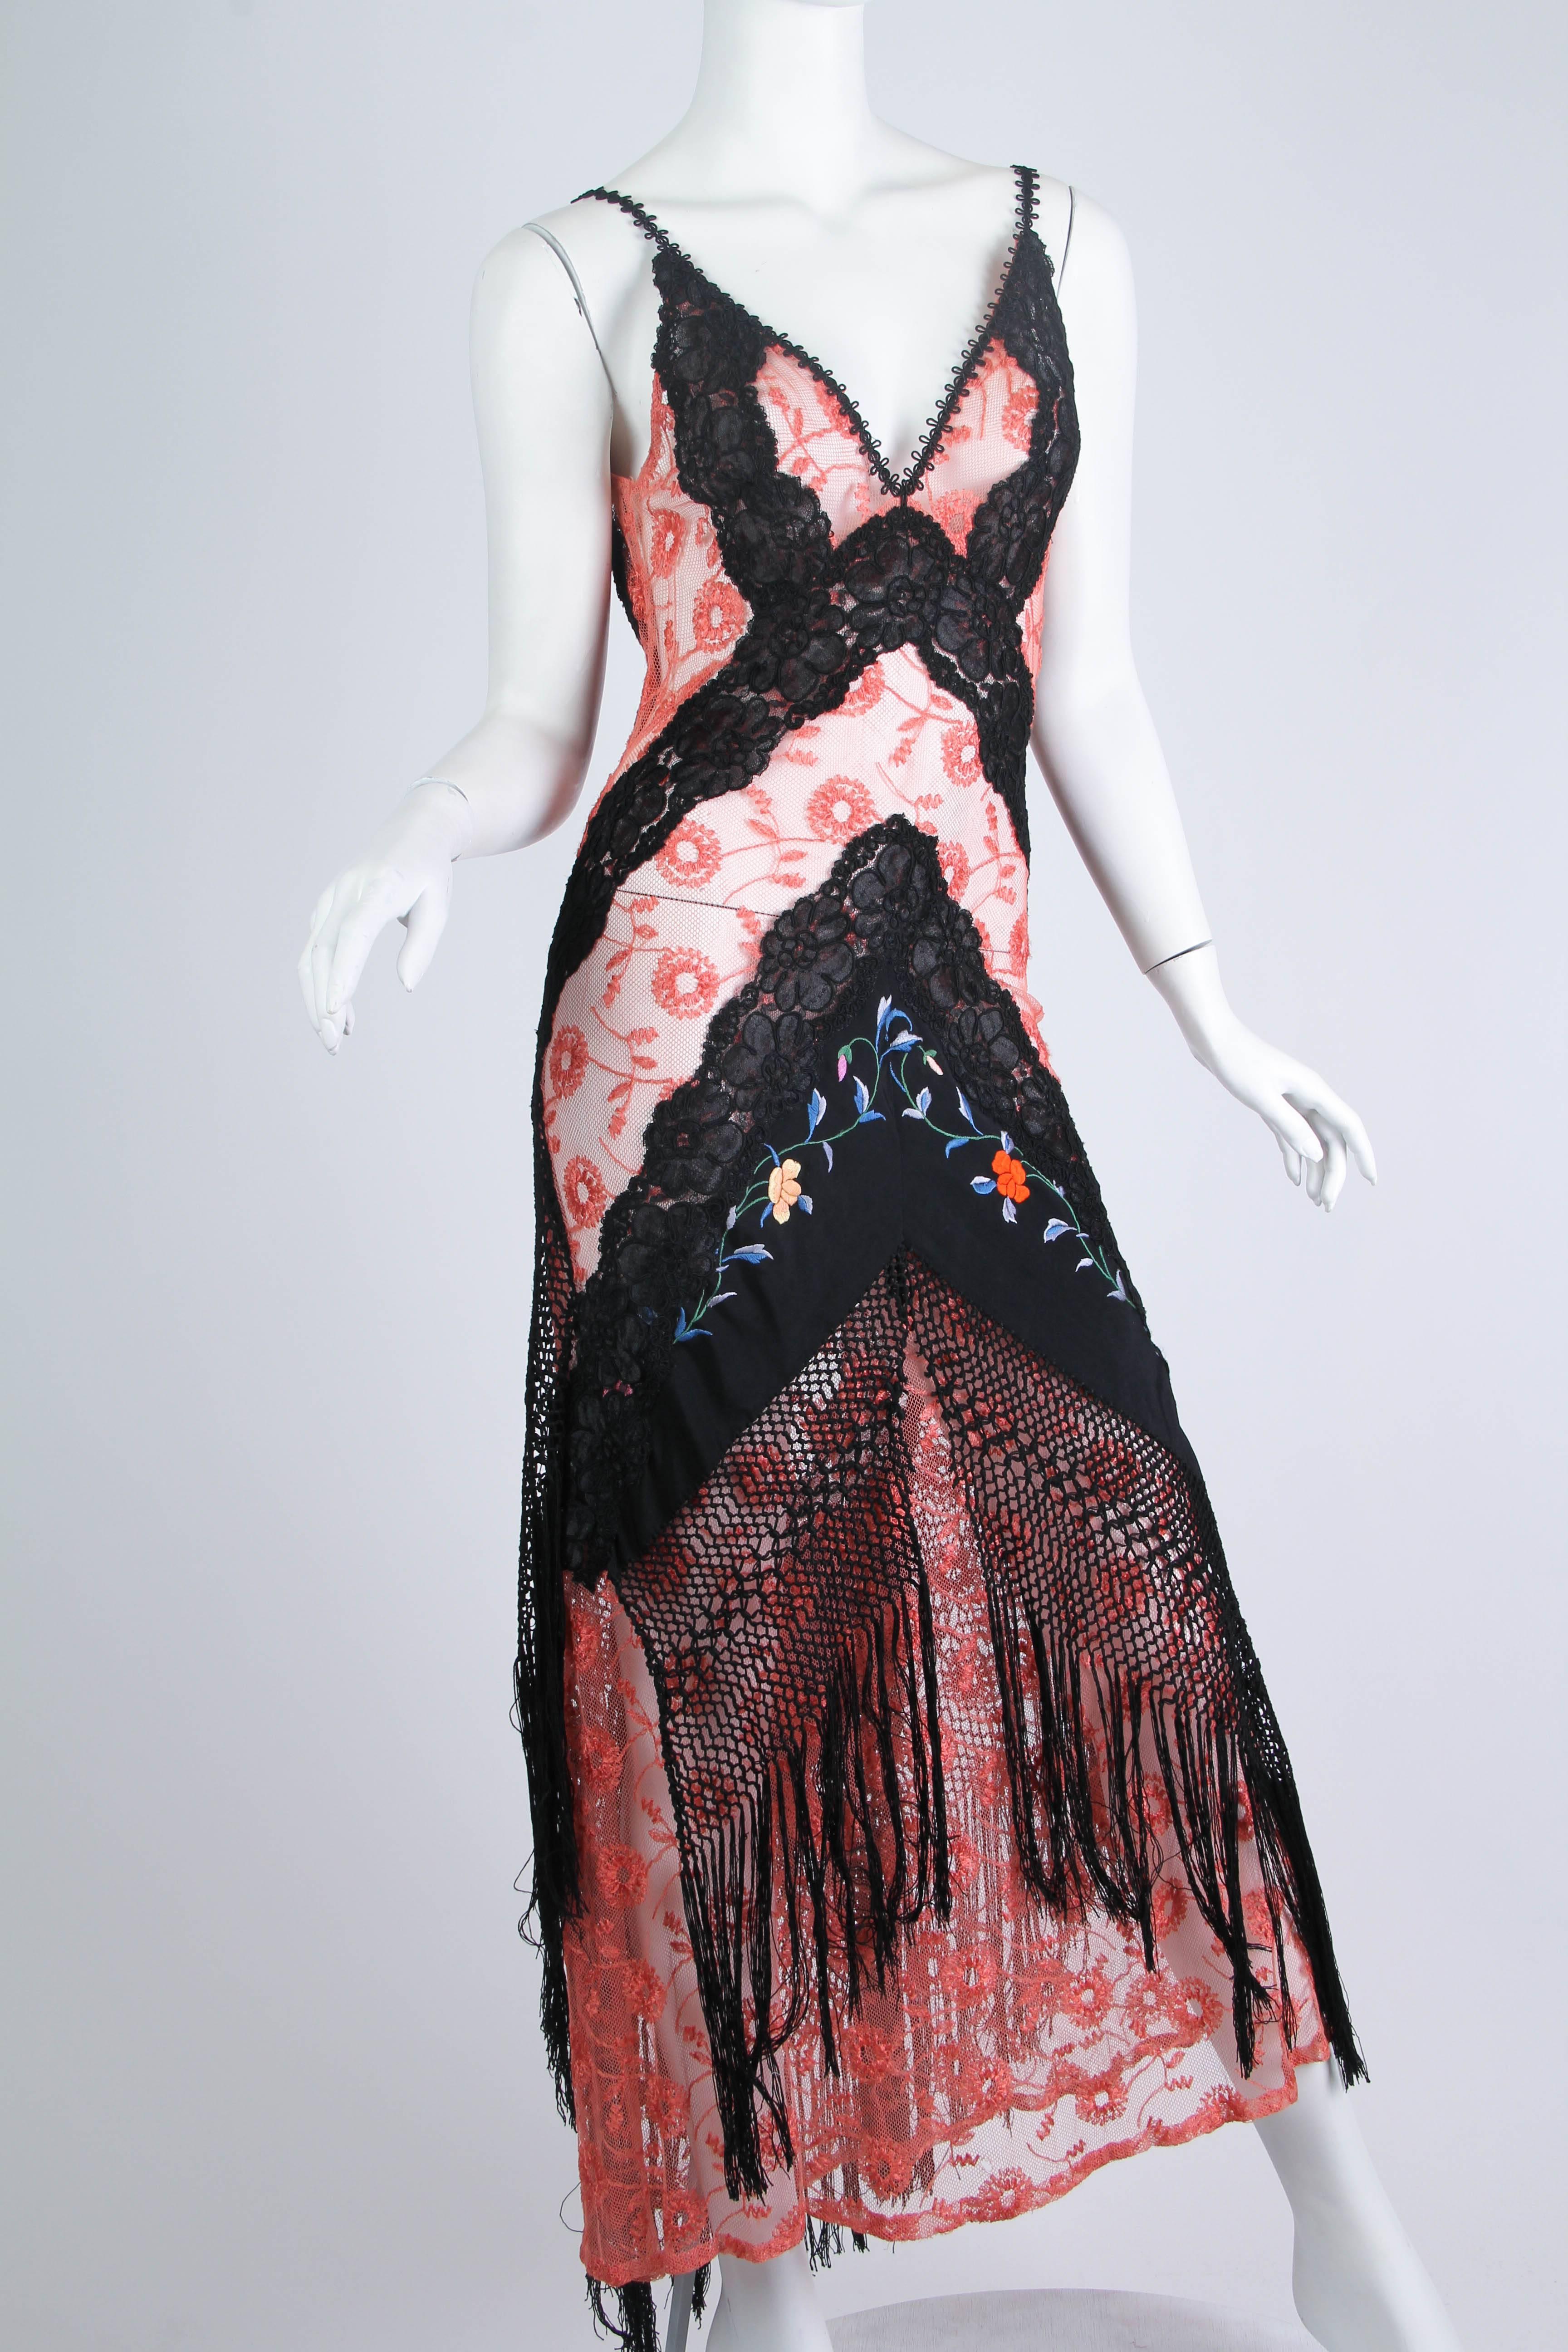 Black 1930s Bias Cut Silk Net Lace Dress Re-Built with Chinese Embroidery and Fringe